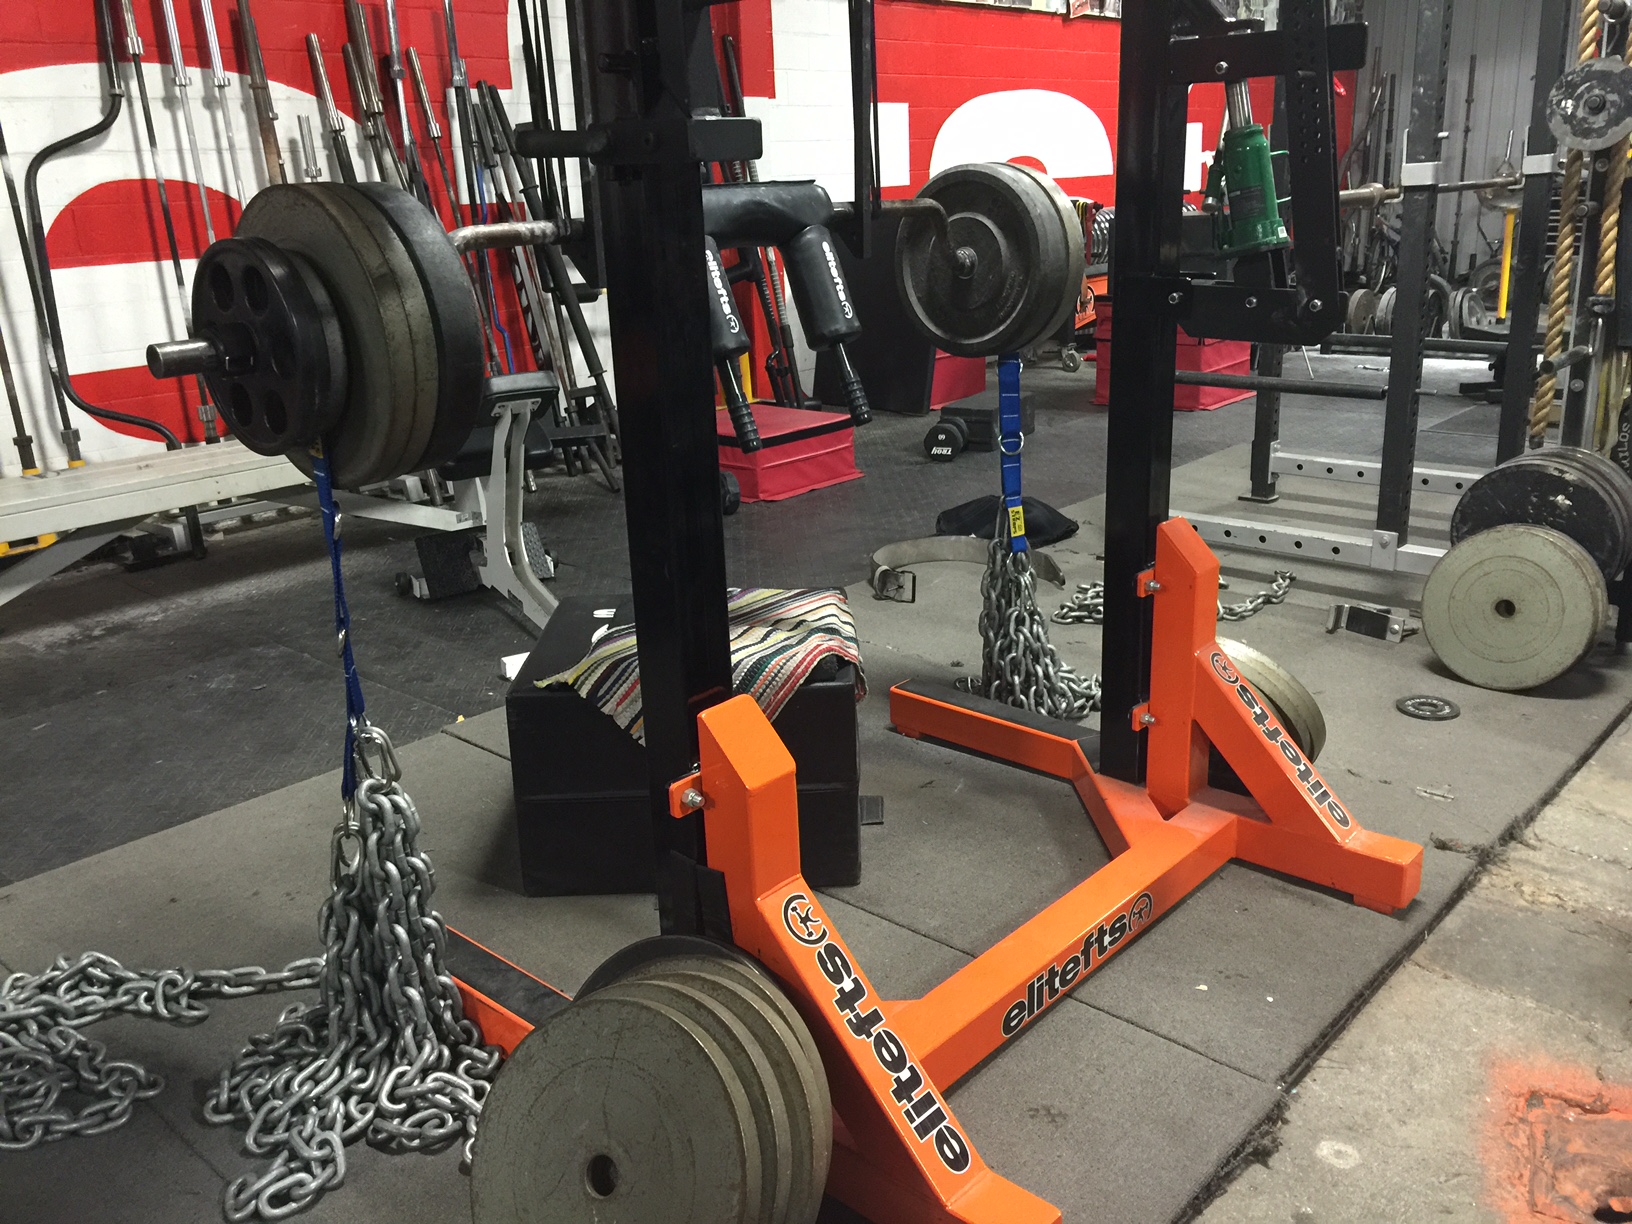 5/3/1 WK 1 Day 1 Squats - Wisconsin Tour, Top Line Gym